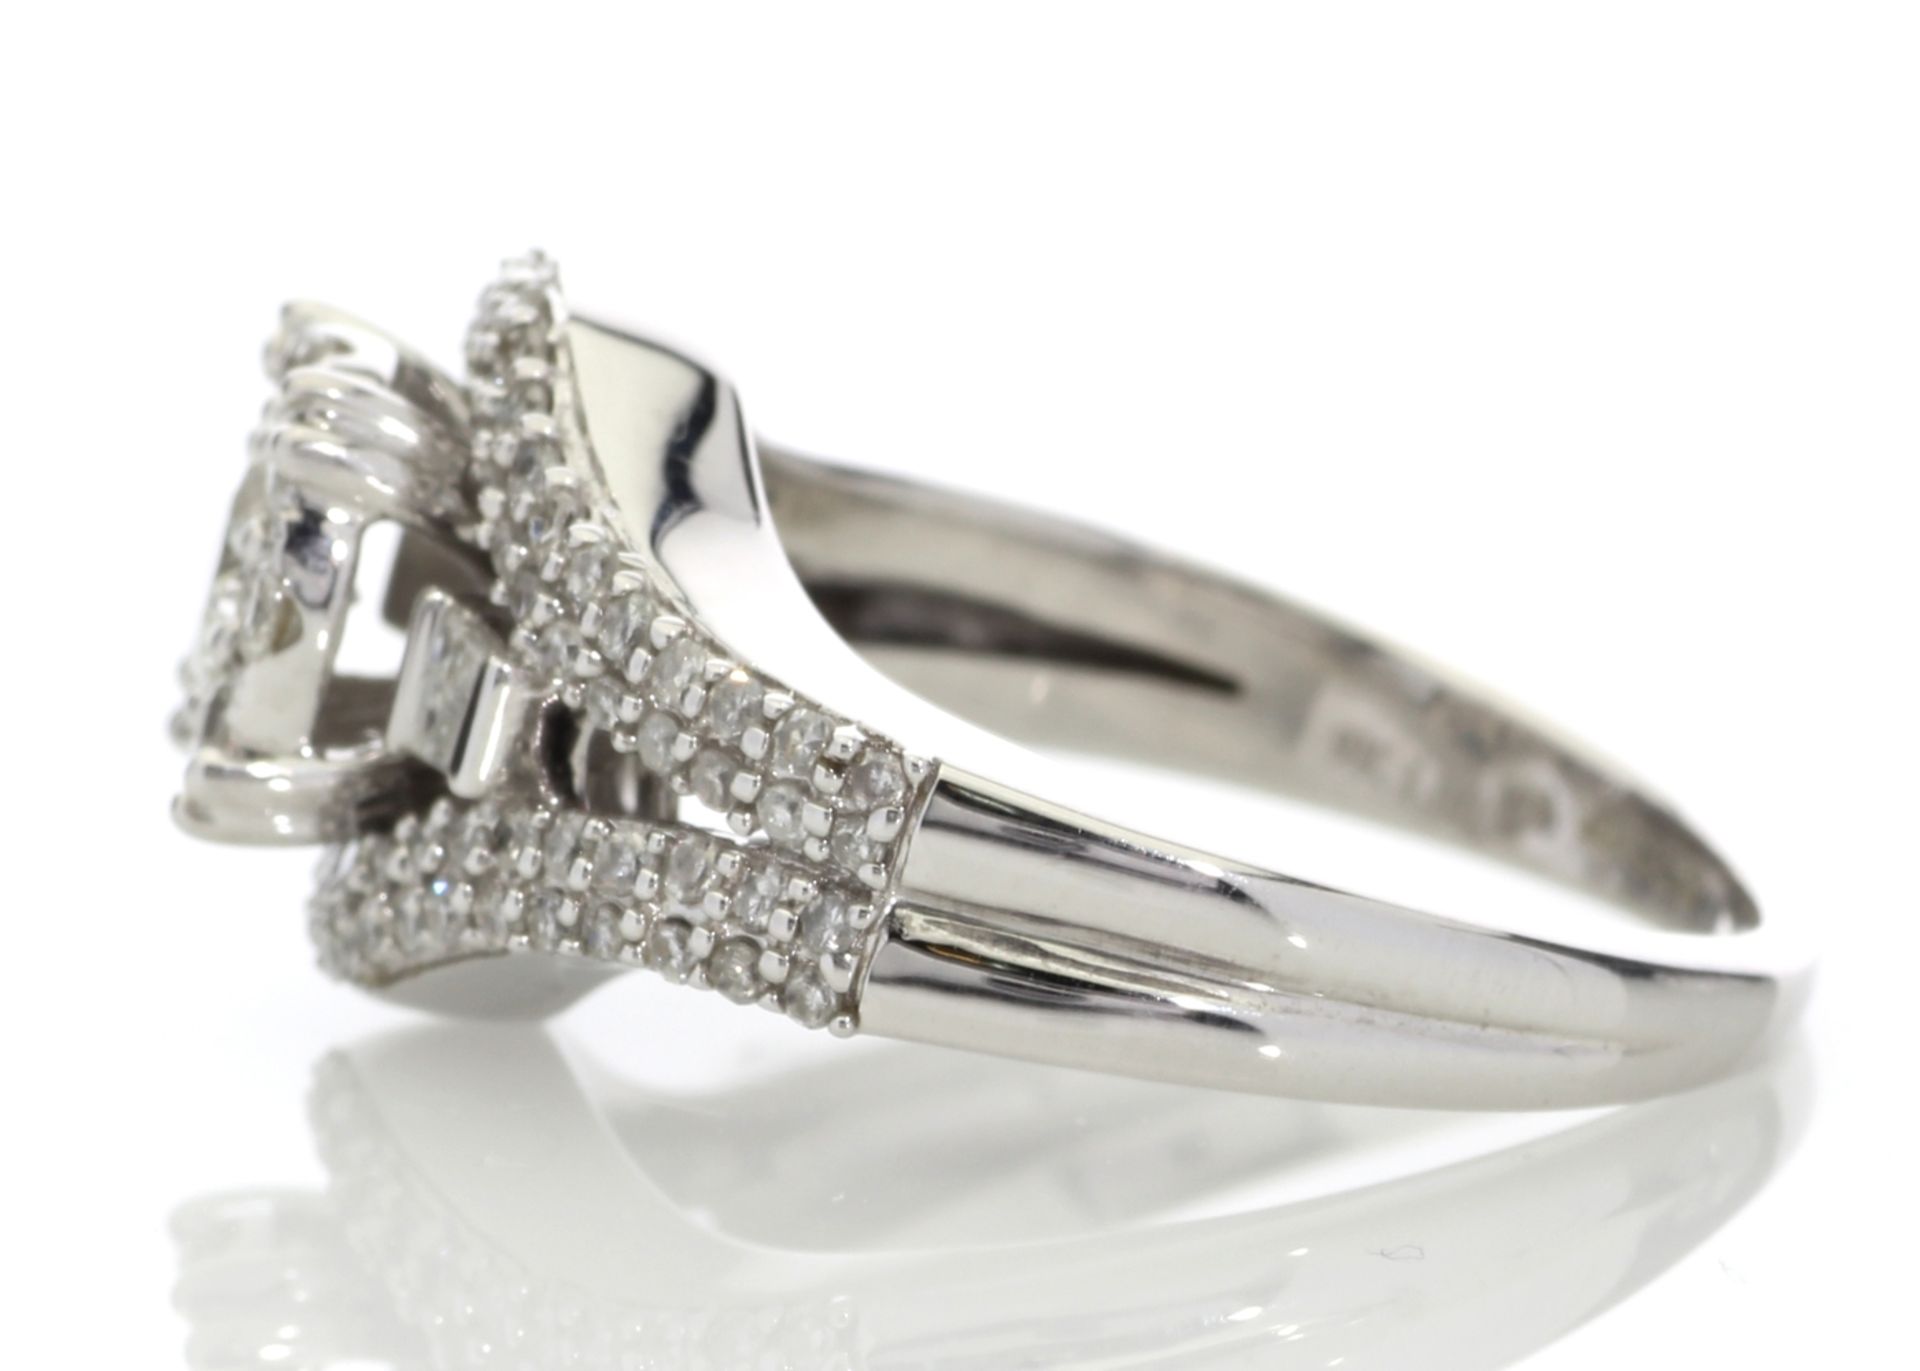 9ct White Gold Round Cluster Claw Set Diamond Ring 1.00 Carats - Valued by AGI £4,180.00 - This - Image 3 of 4